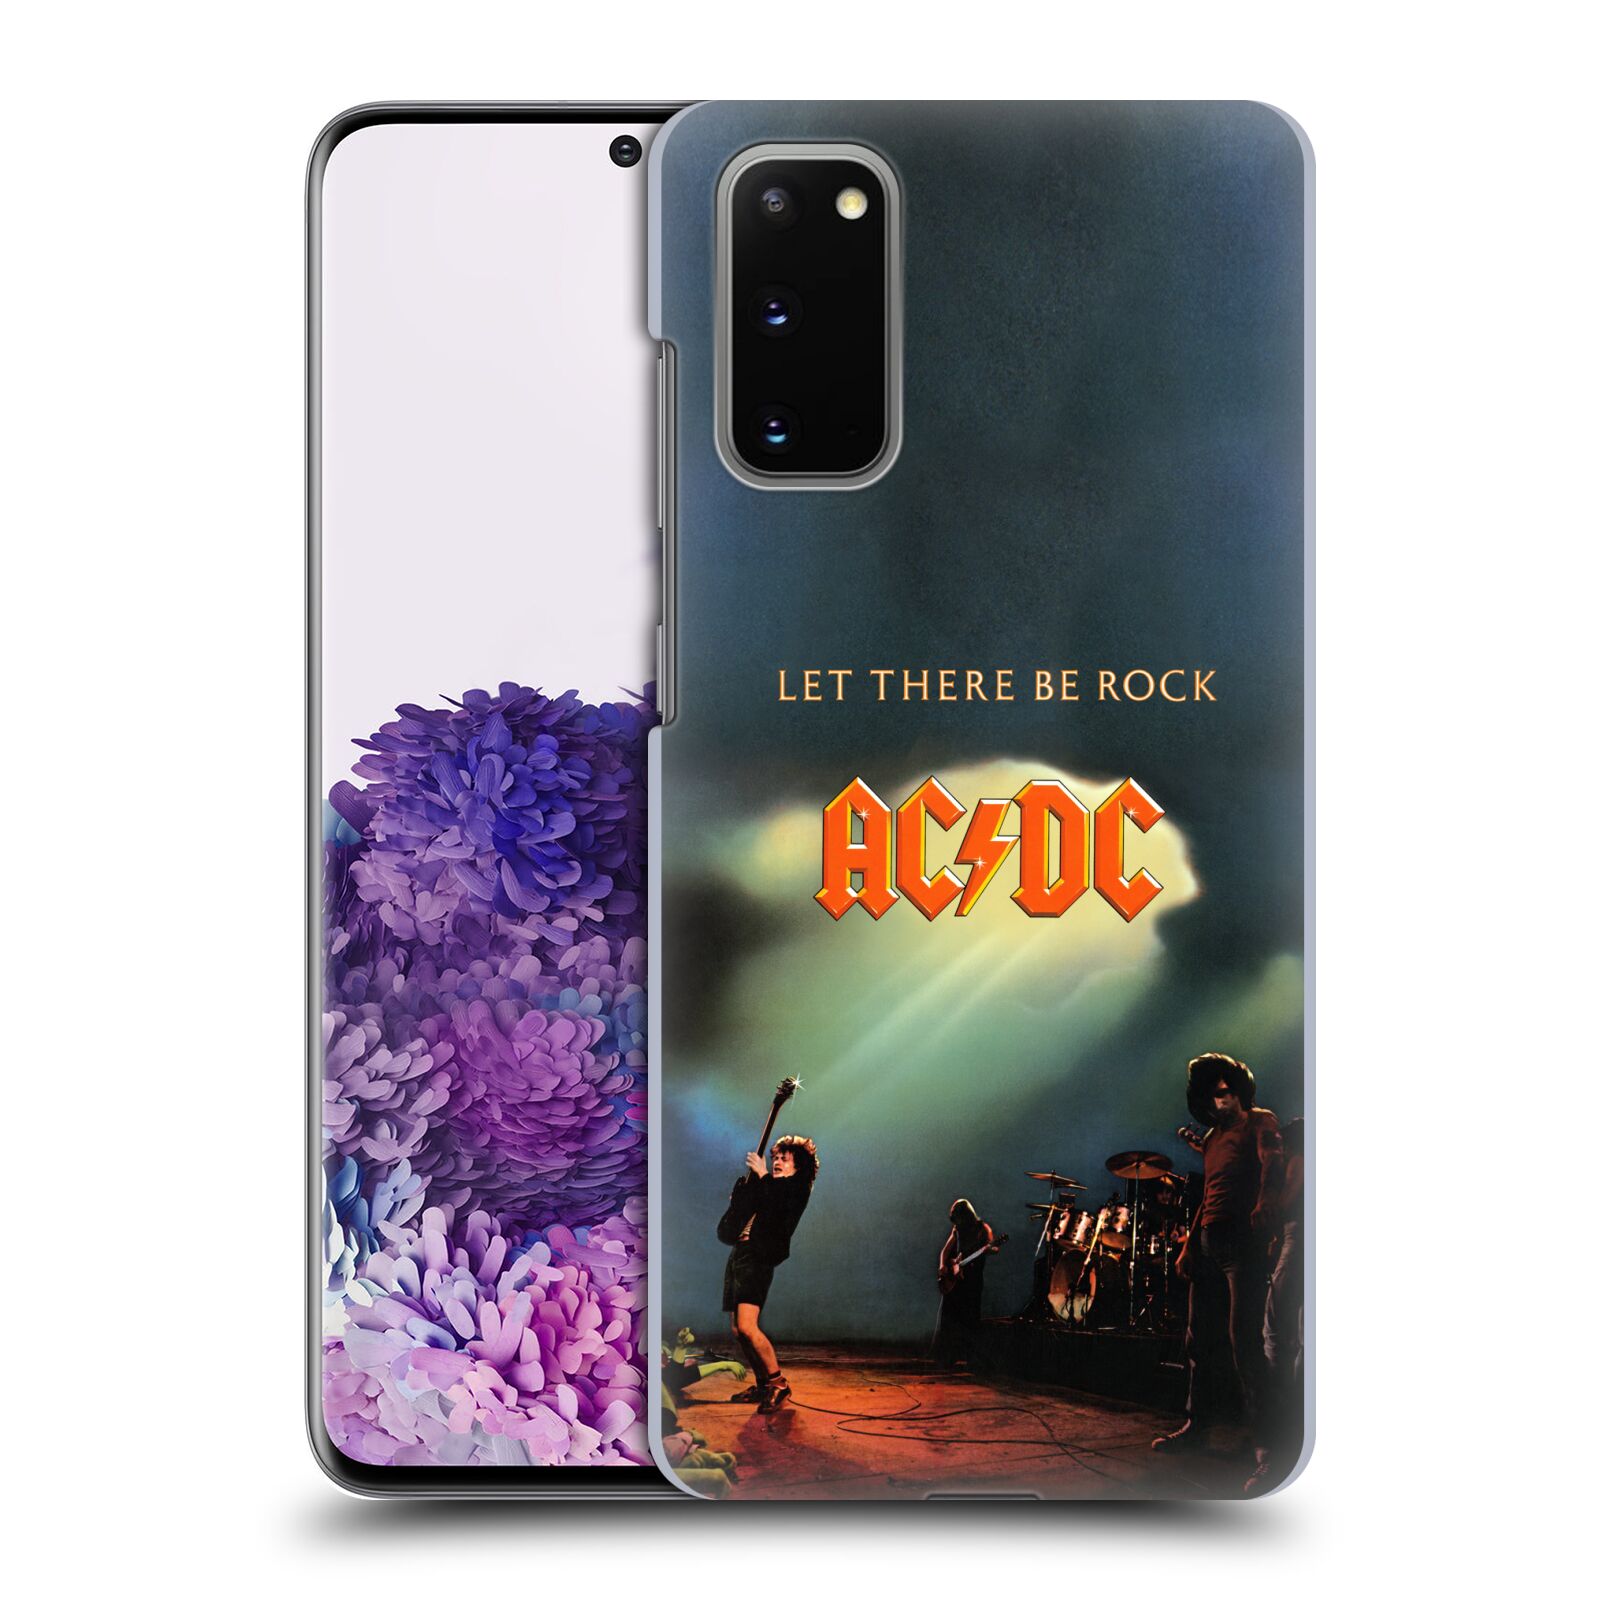 Samsung Galaxy s9 plus bolso funda flip case-ACDC For Those About to Rock